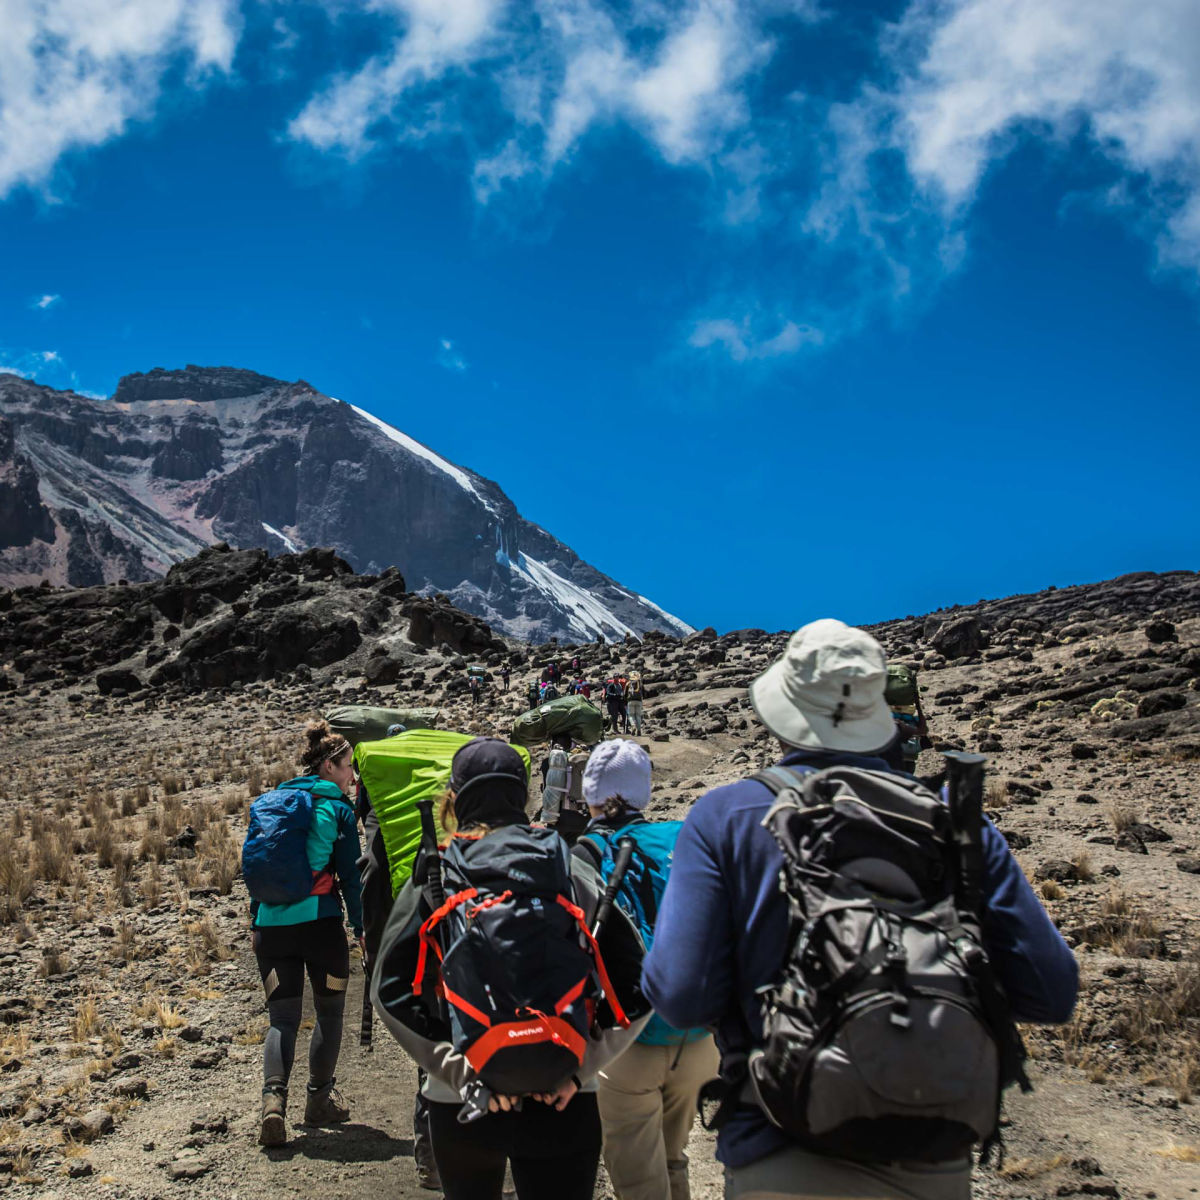 A line of Kilimanjaro hikers walking towards the peak and away from the camera on the Marangu route